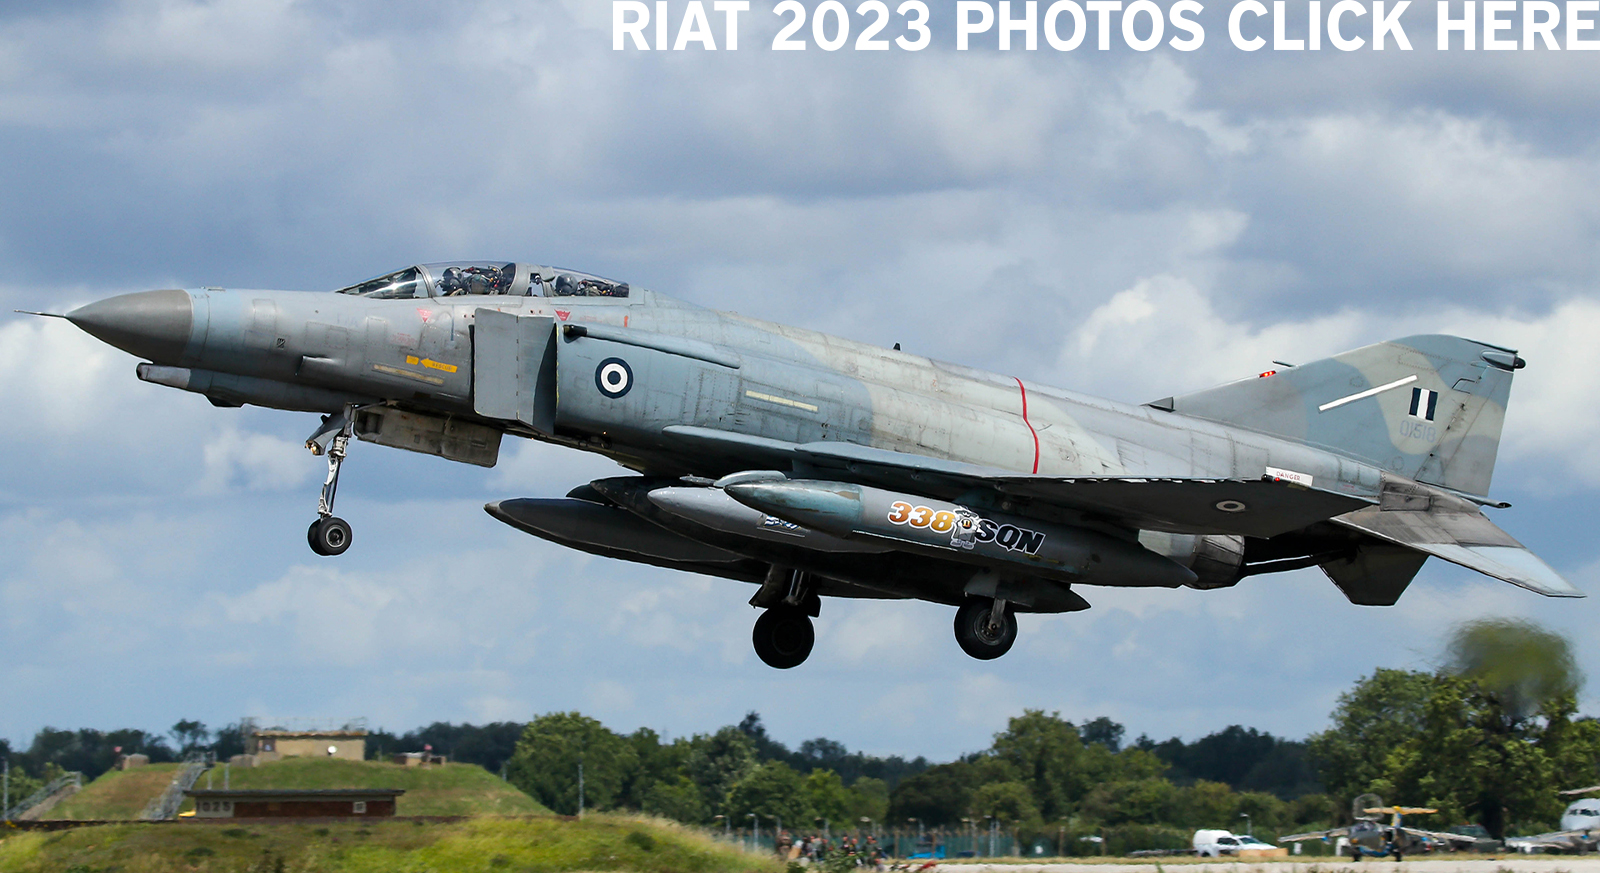 Click here for Royal International Air Tattoo 2019